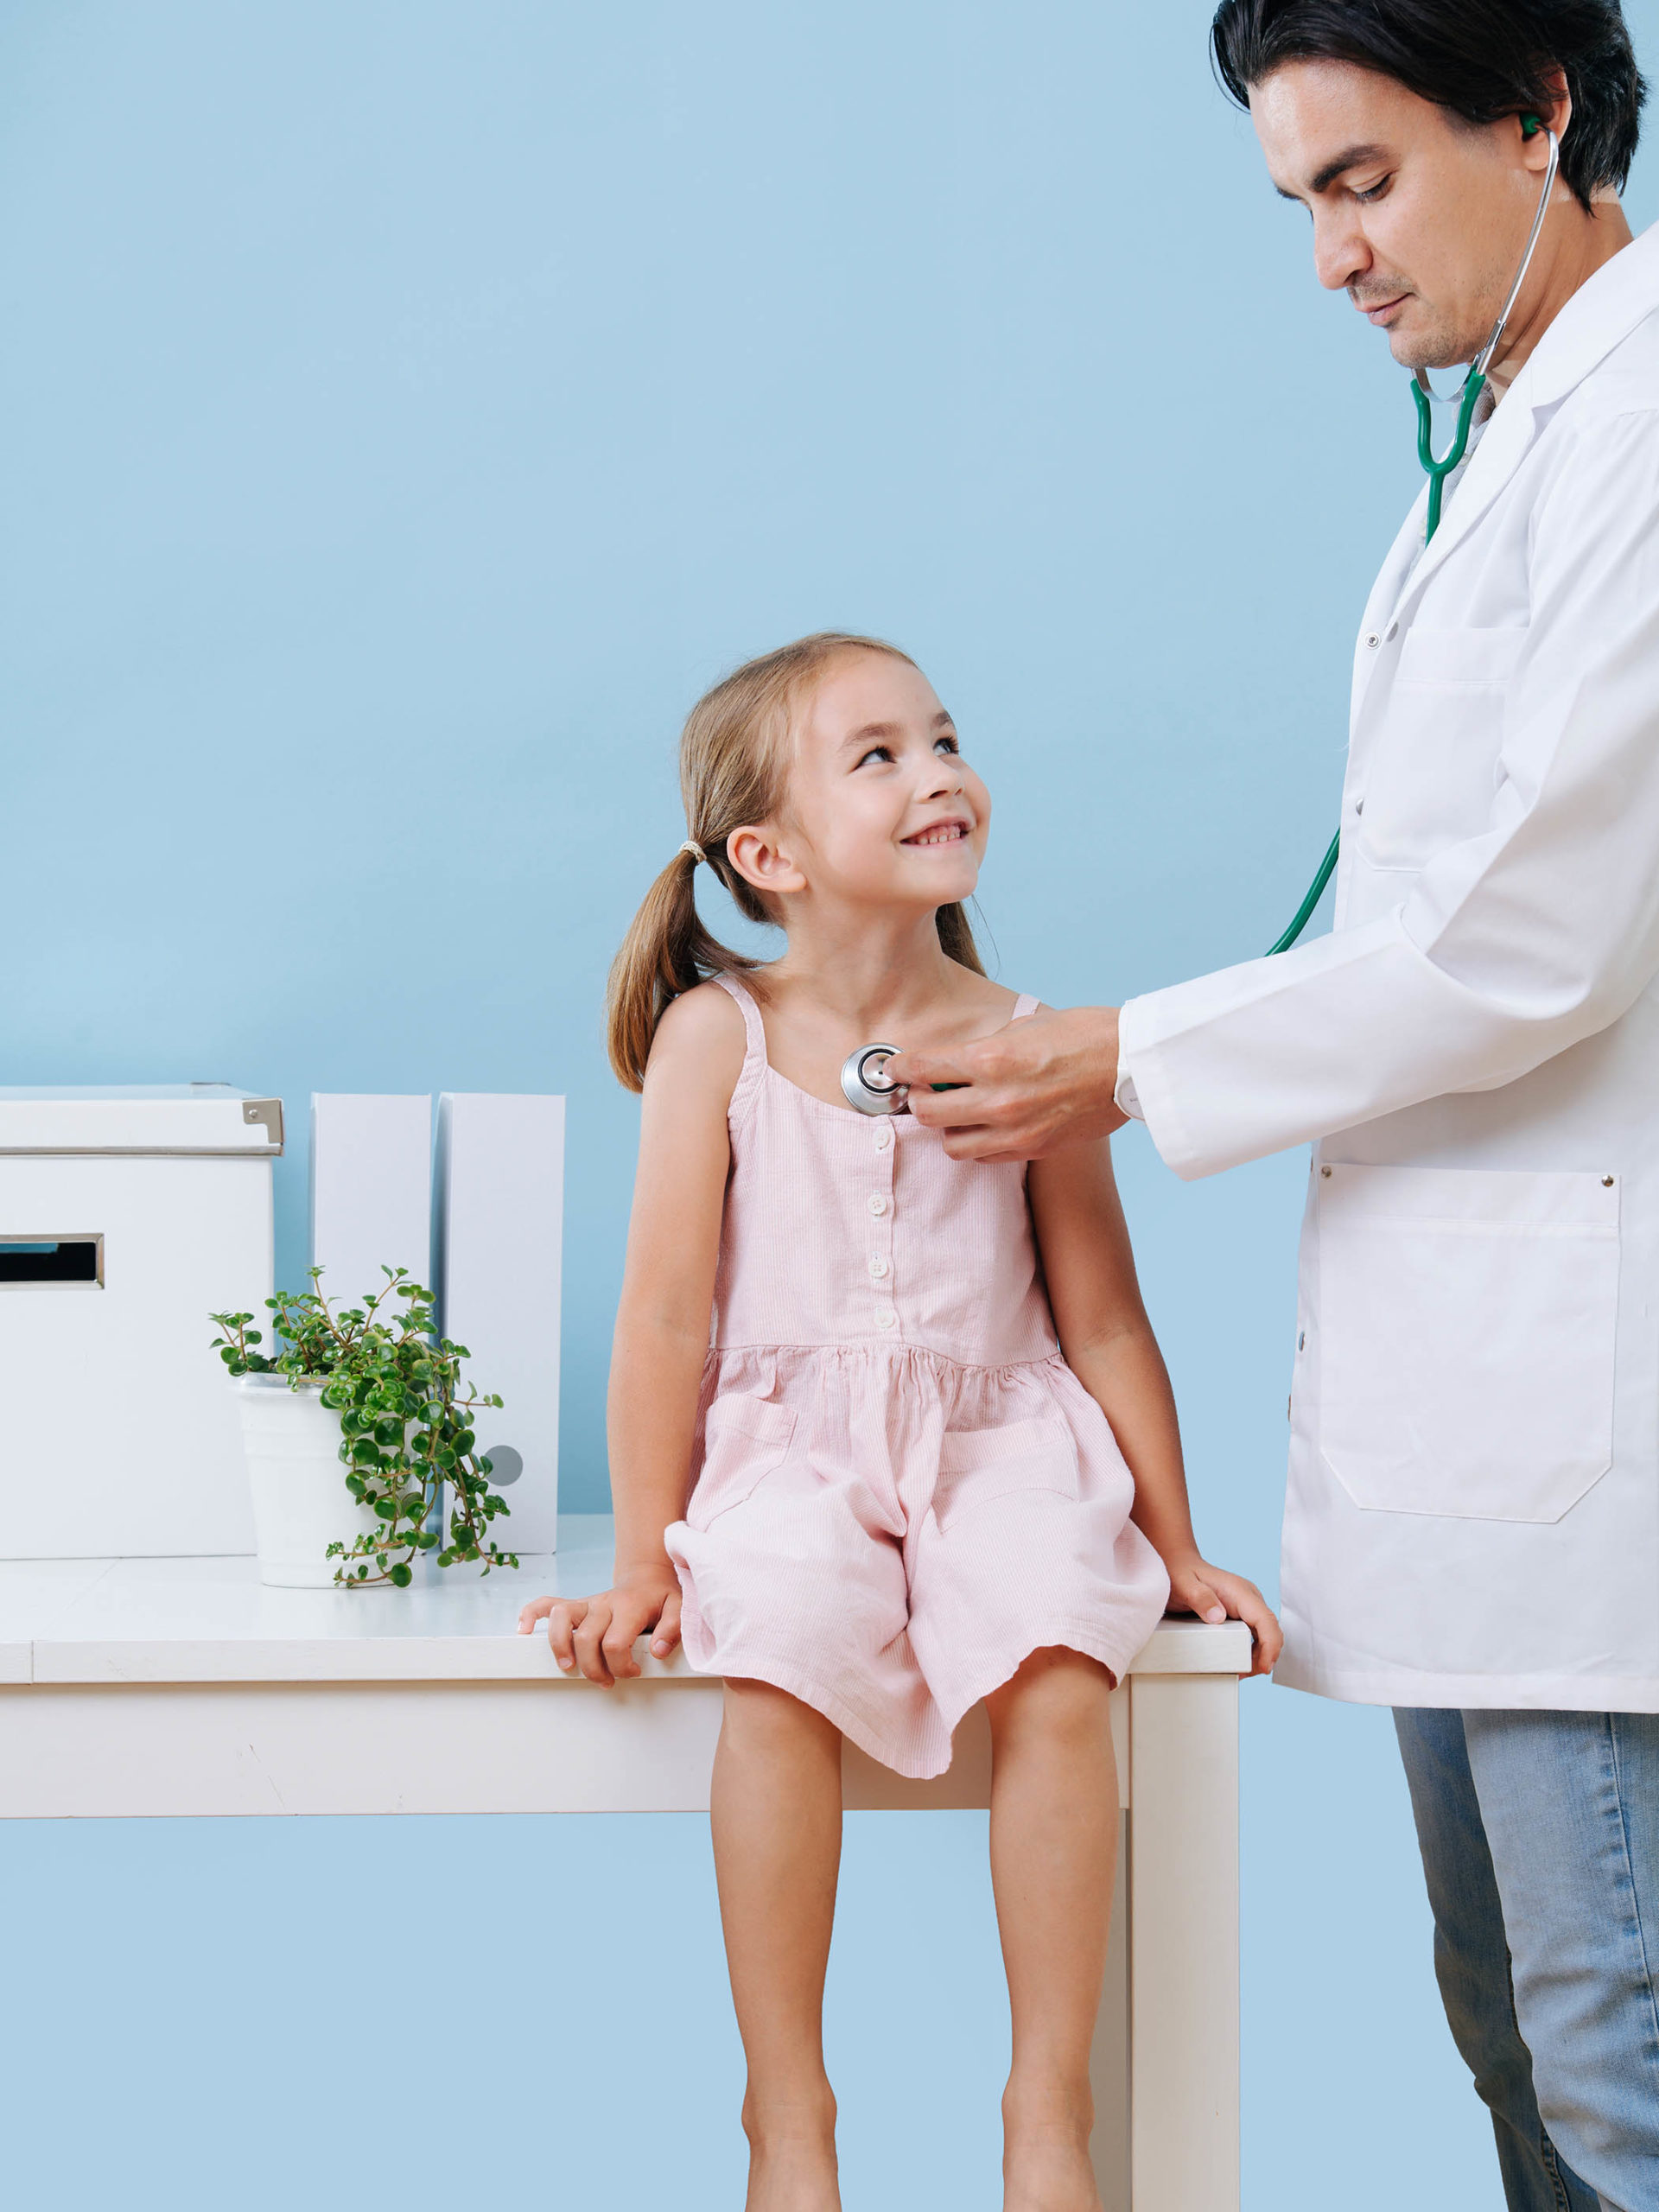 doctor examining a cheerful first grader child girl with a stethoscope